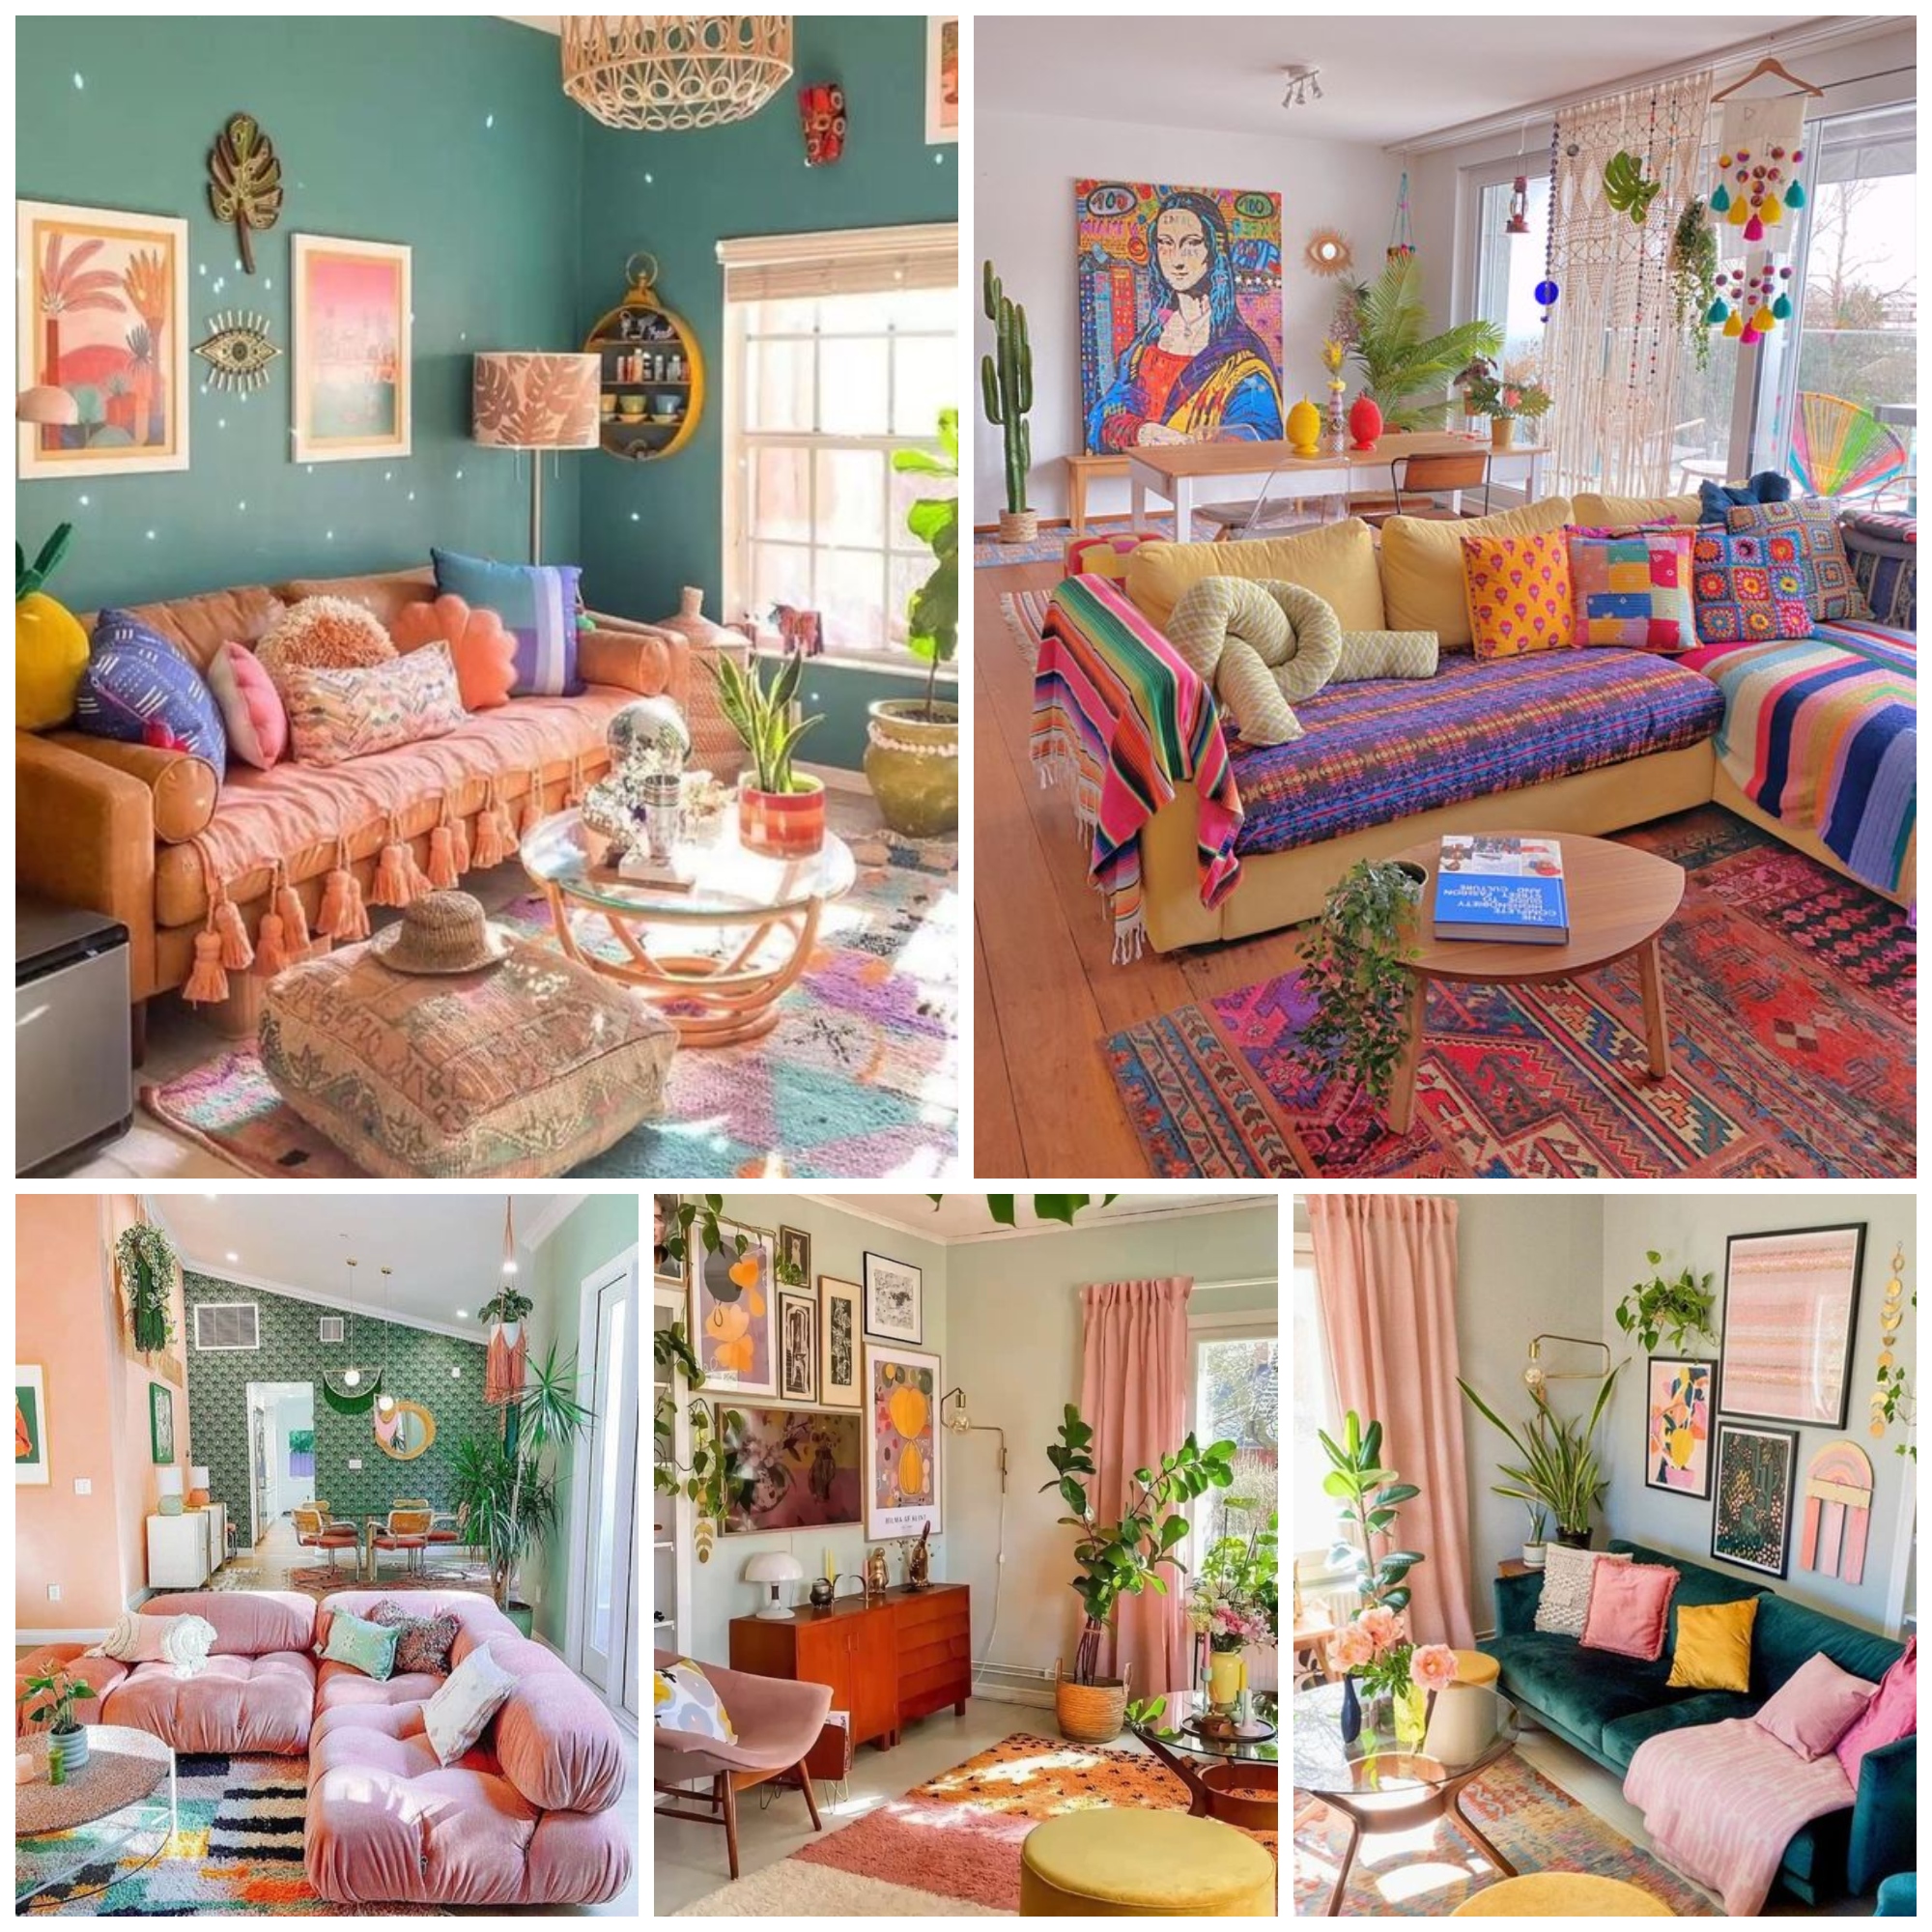 Boho living room ideas – create an eclectic relaxed space to kick-back